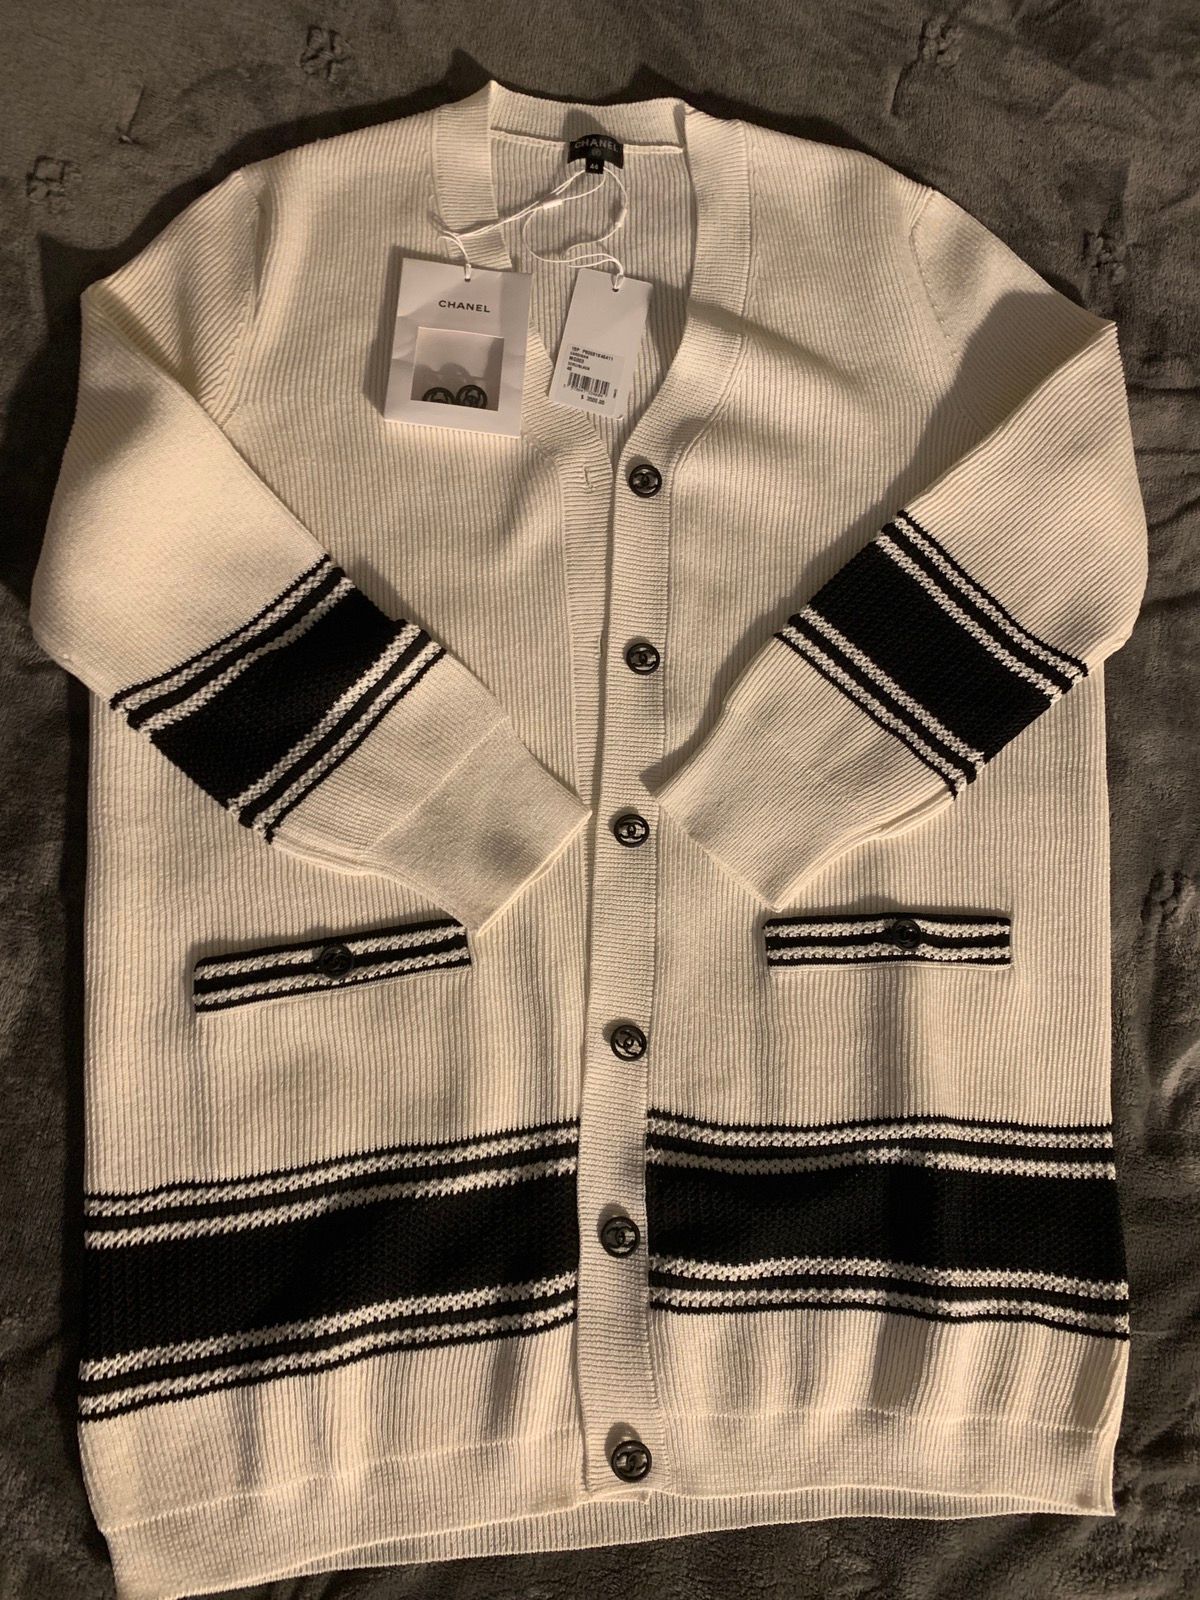 How much does a Chanel cardigan cost? : r/Grailed